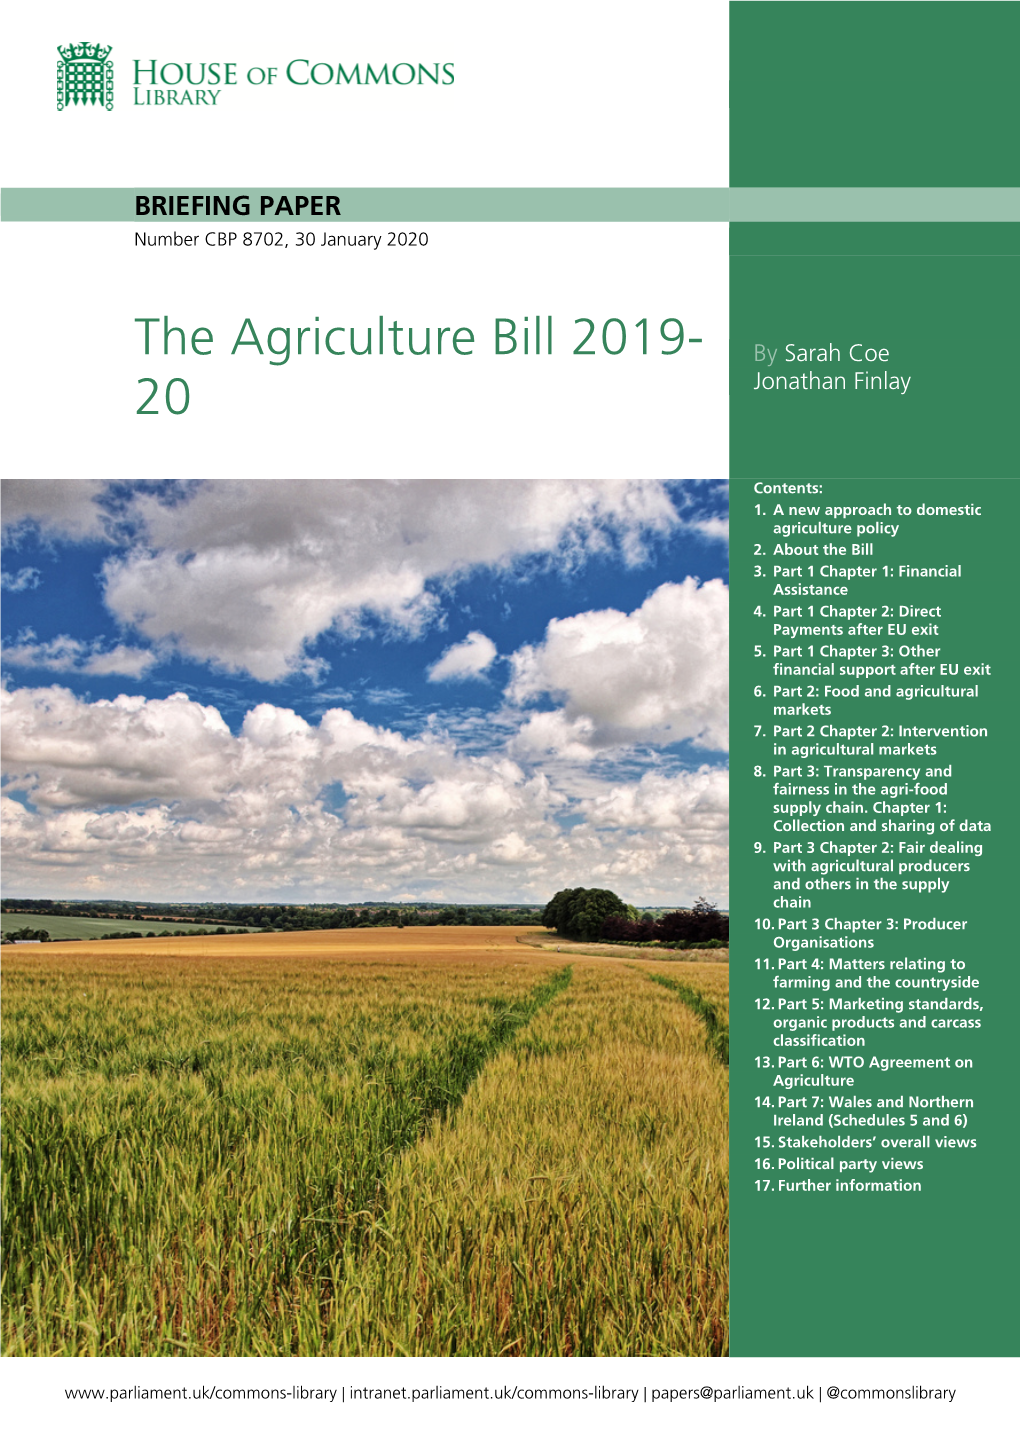 The Agriculture Bill 2019-20